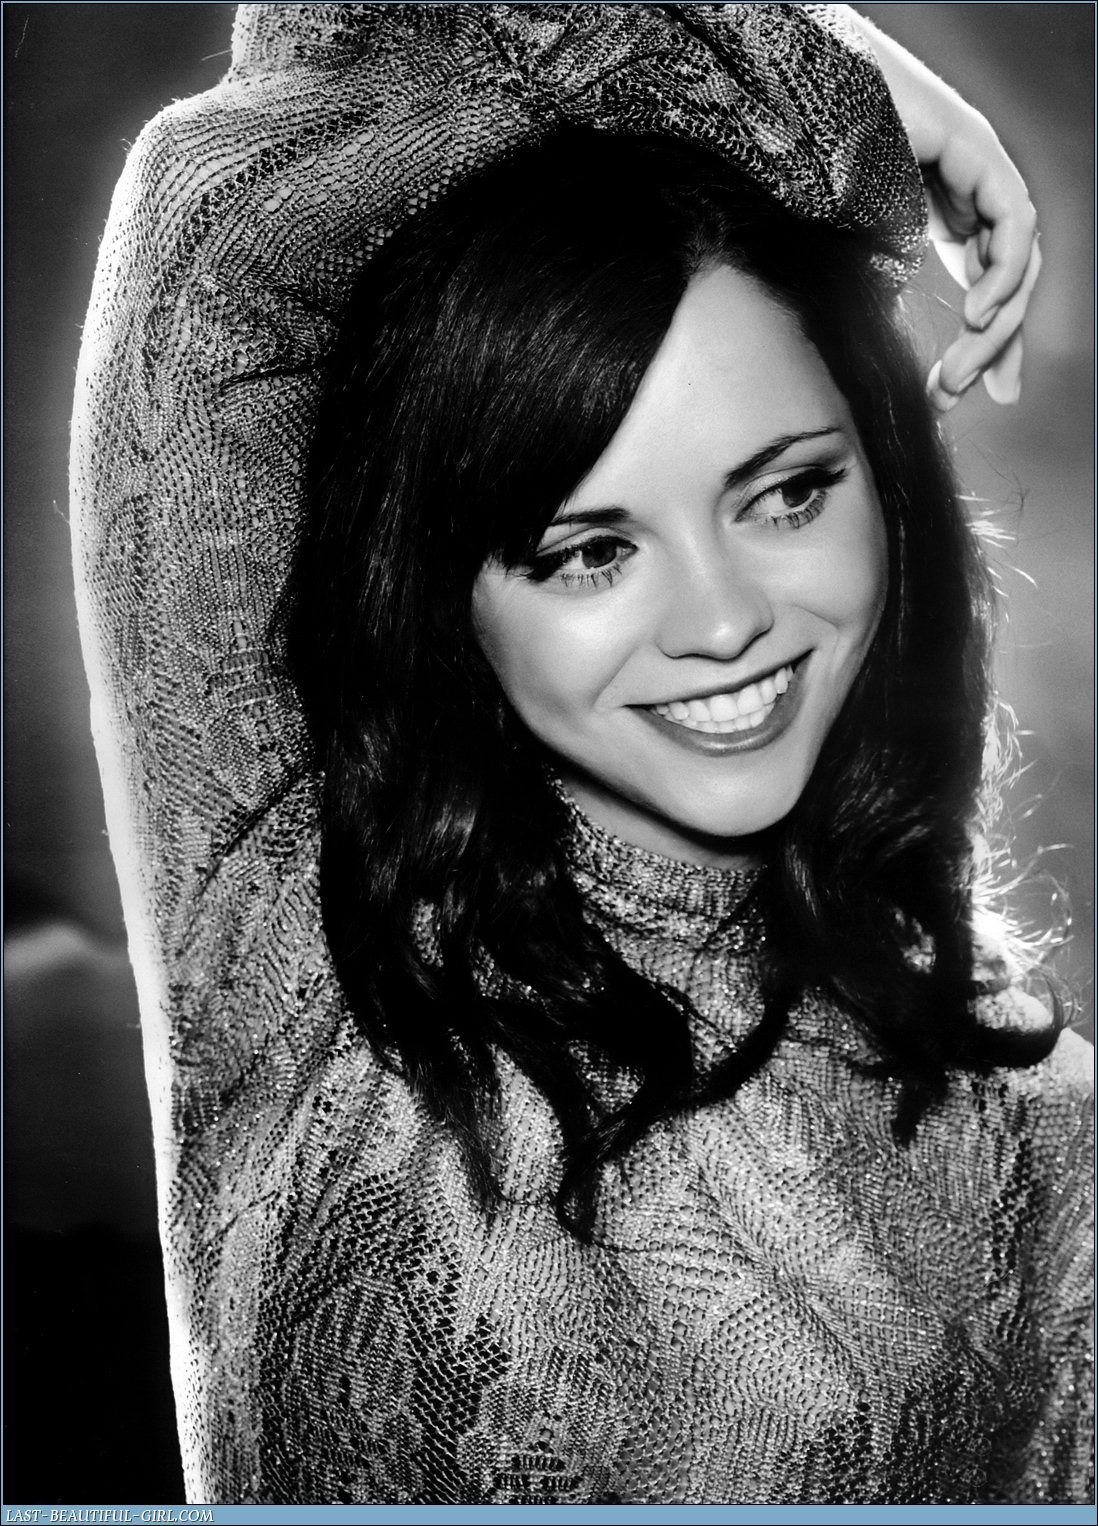 Happy birthday Christina Ricci!
You are finally an adult now :)  